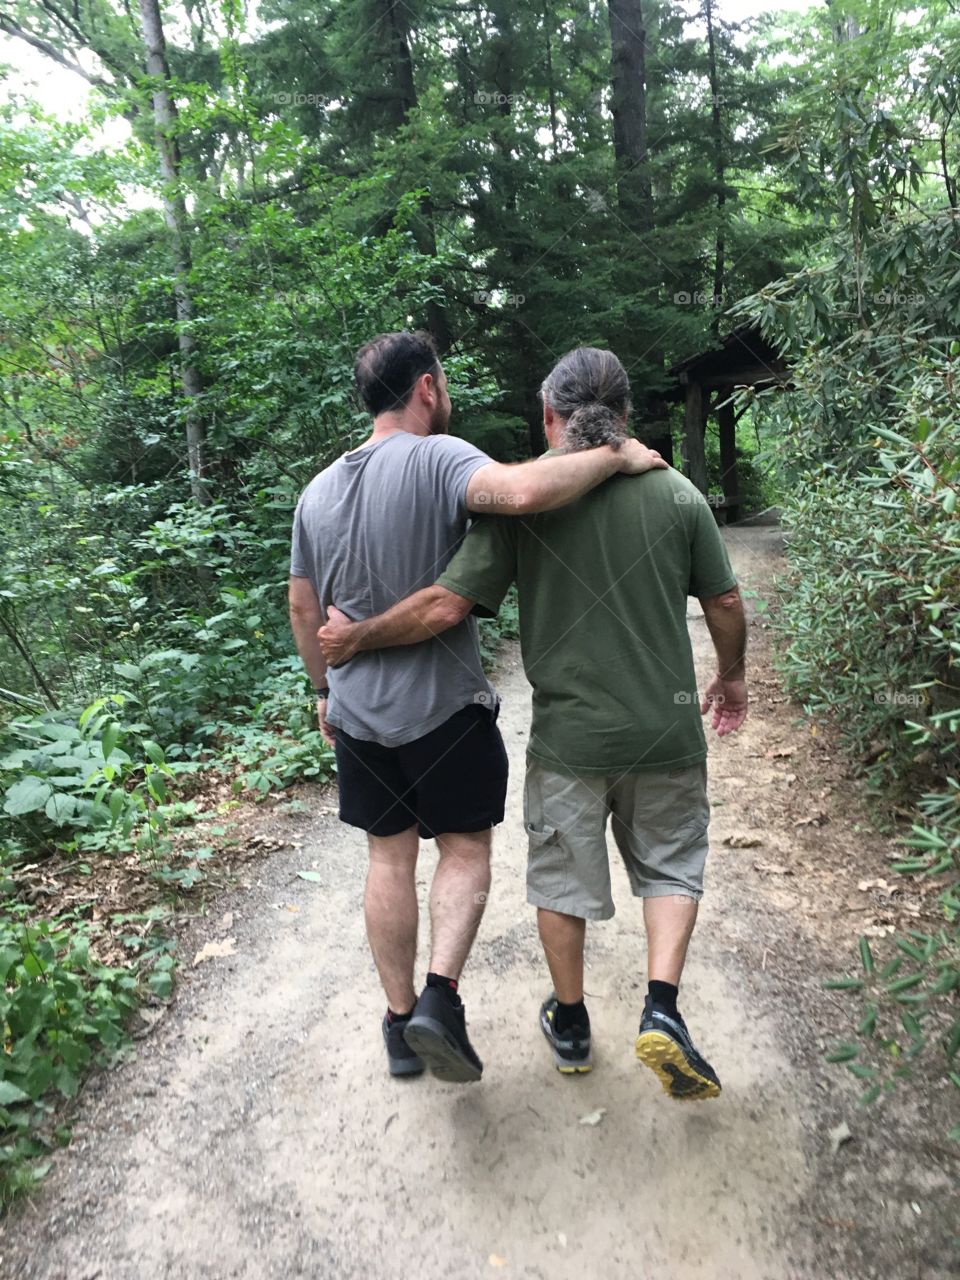 Snapped this photo when all of my extended family was vacationing in NC. We don't see each other that often, but when we do we love deeply. My brother and my dad..